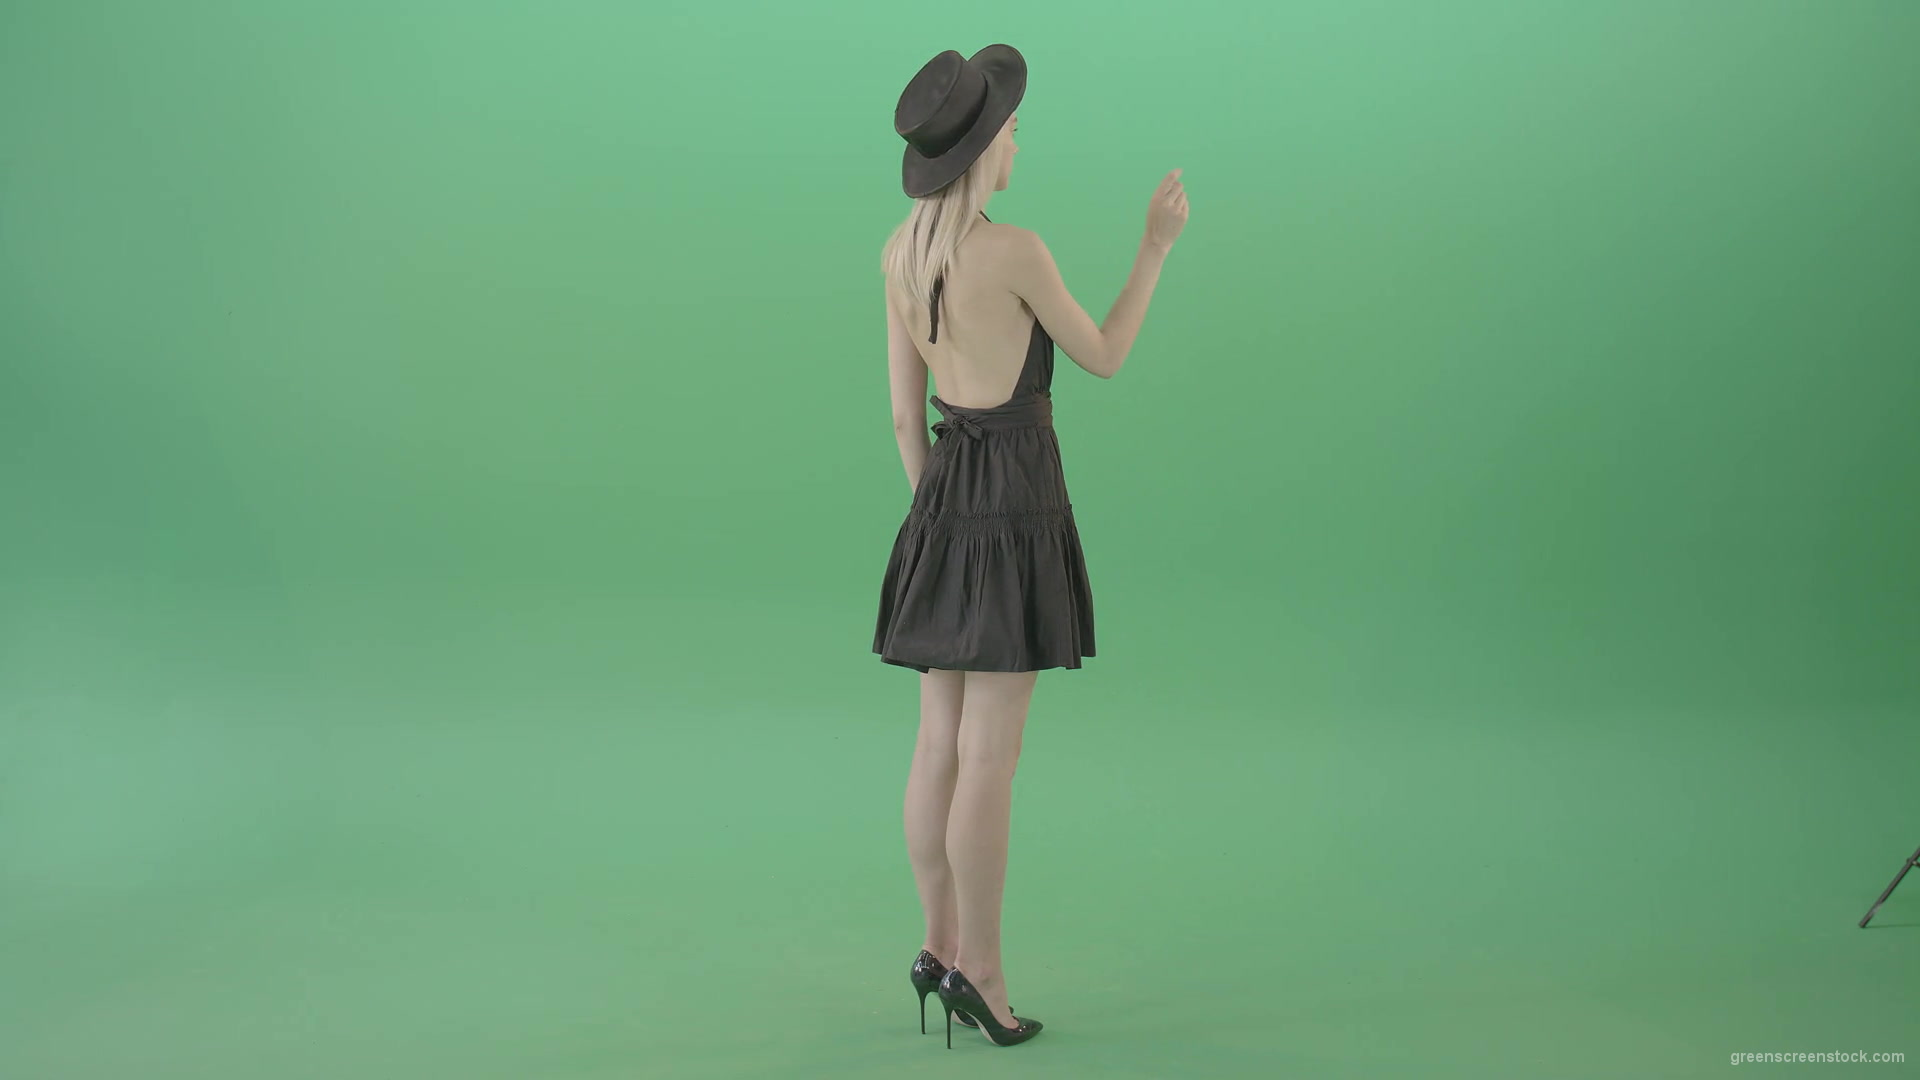 Full-size-fashion-girl-looking-virtual-products-on-touch-green-screen-4K-Video-Footage-1920_007 Green Screen Stock